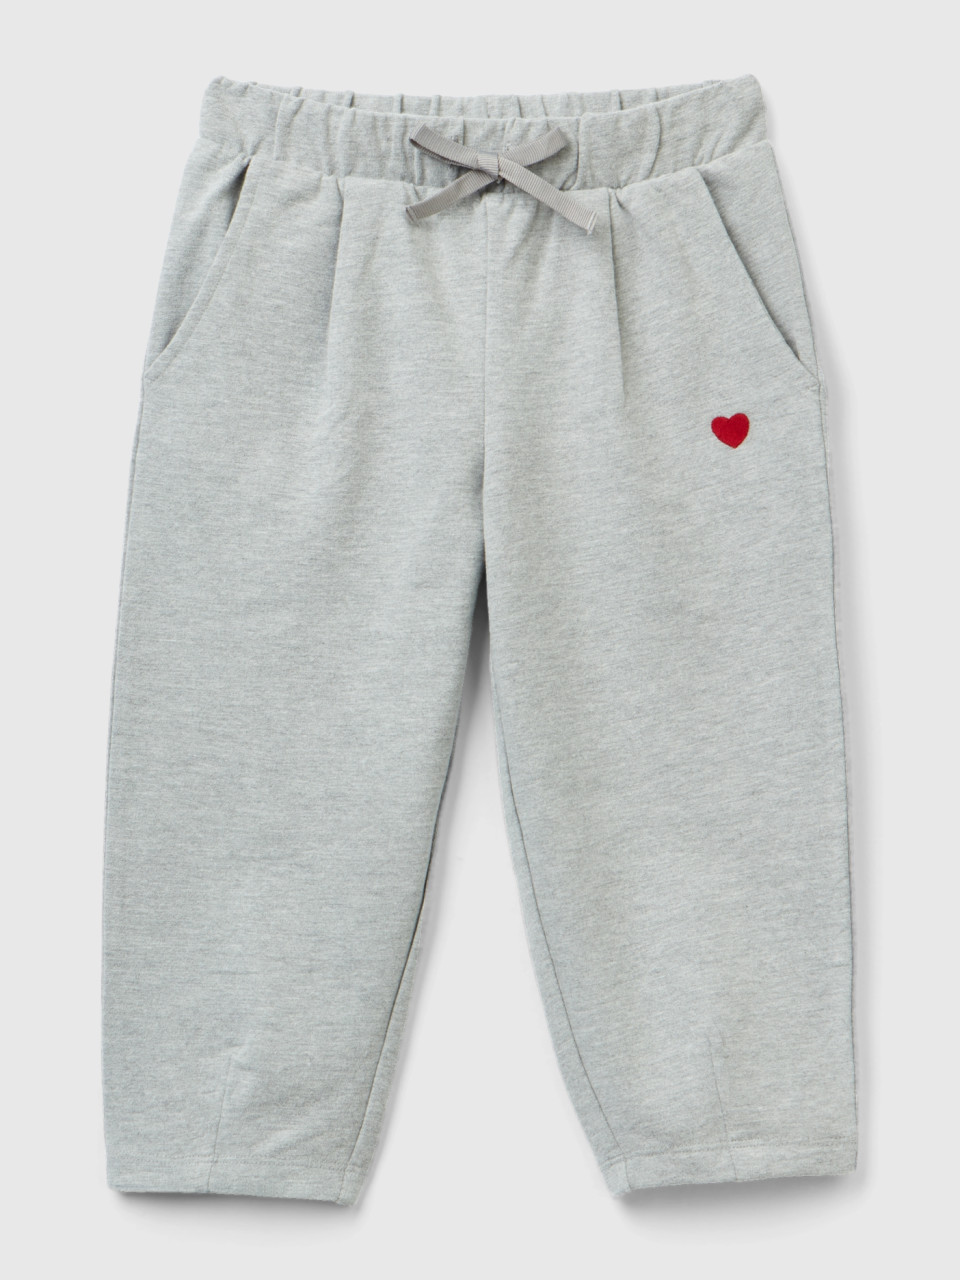 Benetton, Slim Fit Joggers With Embroidery, Light Gray, Kids